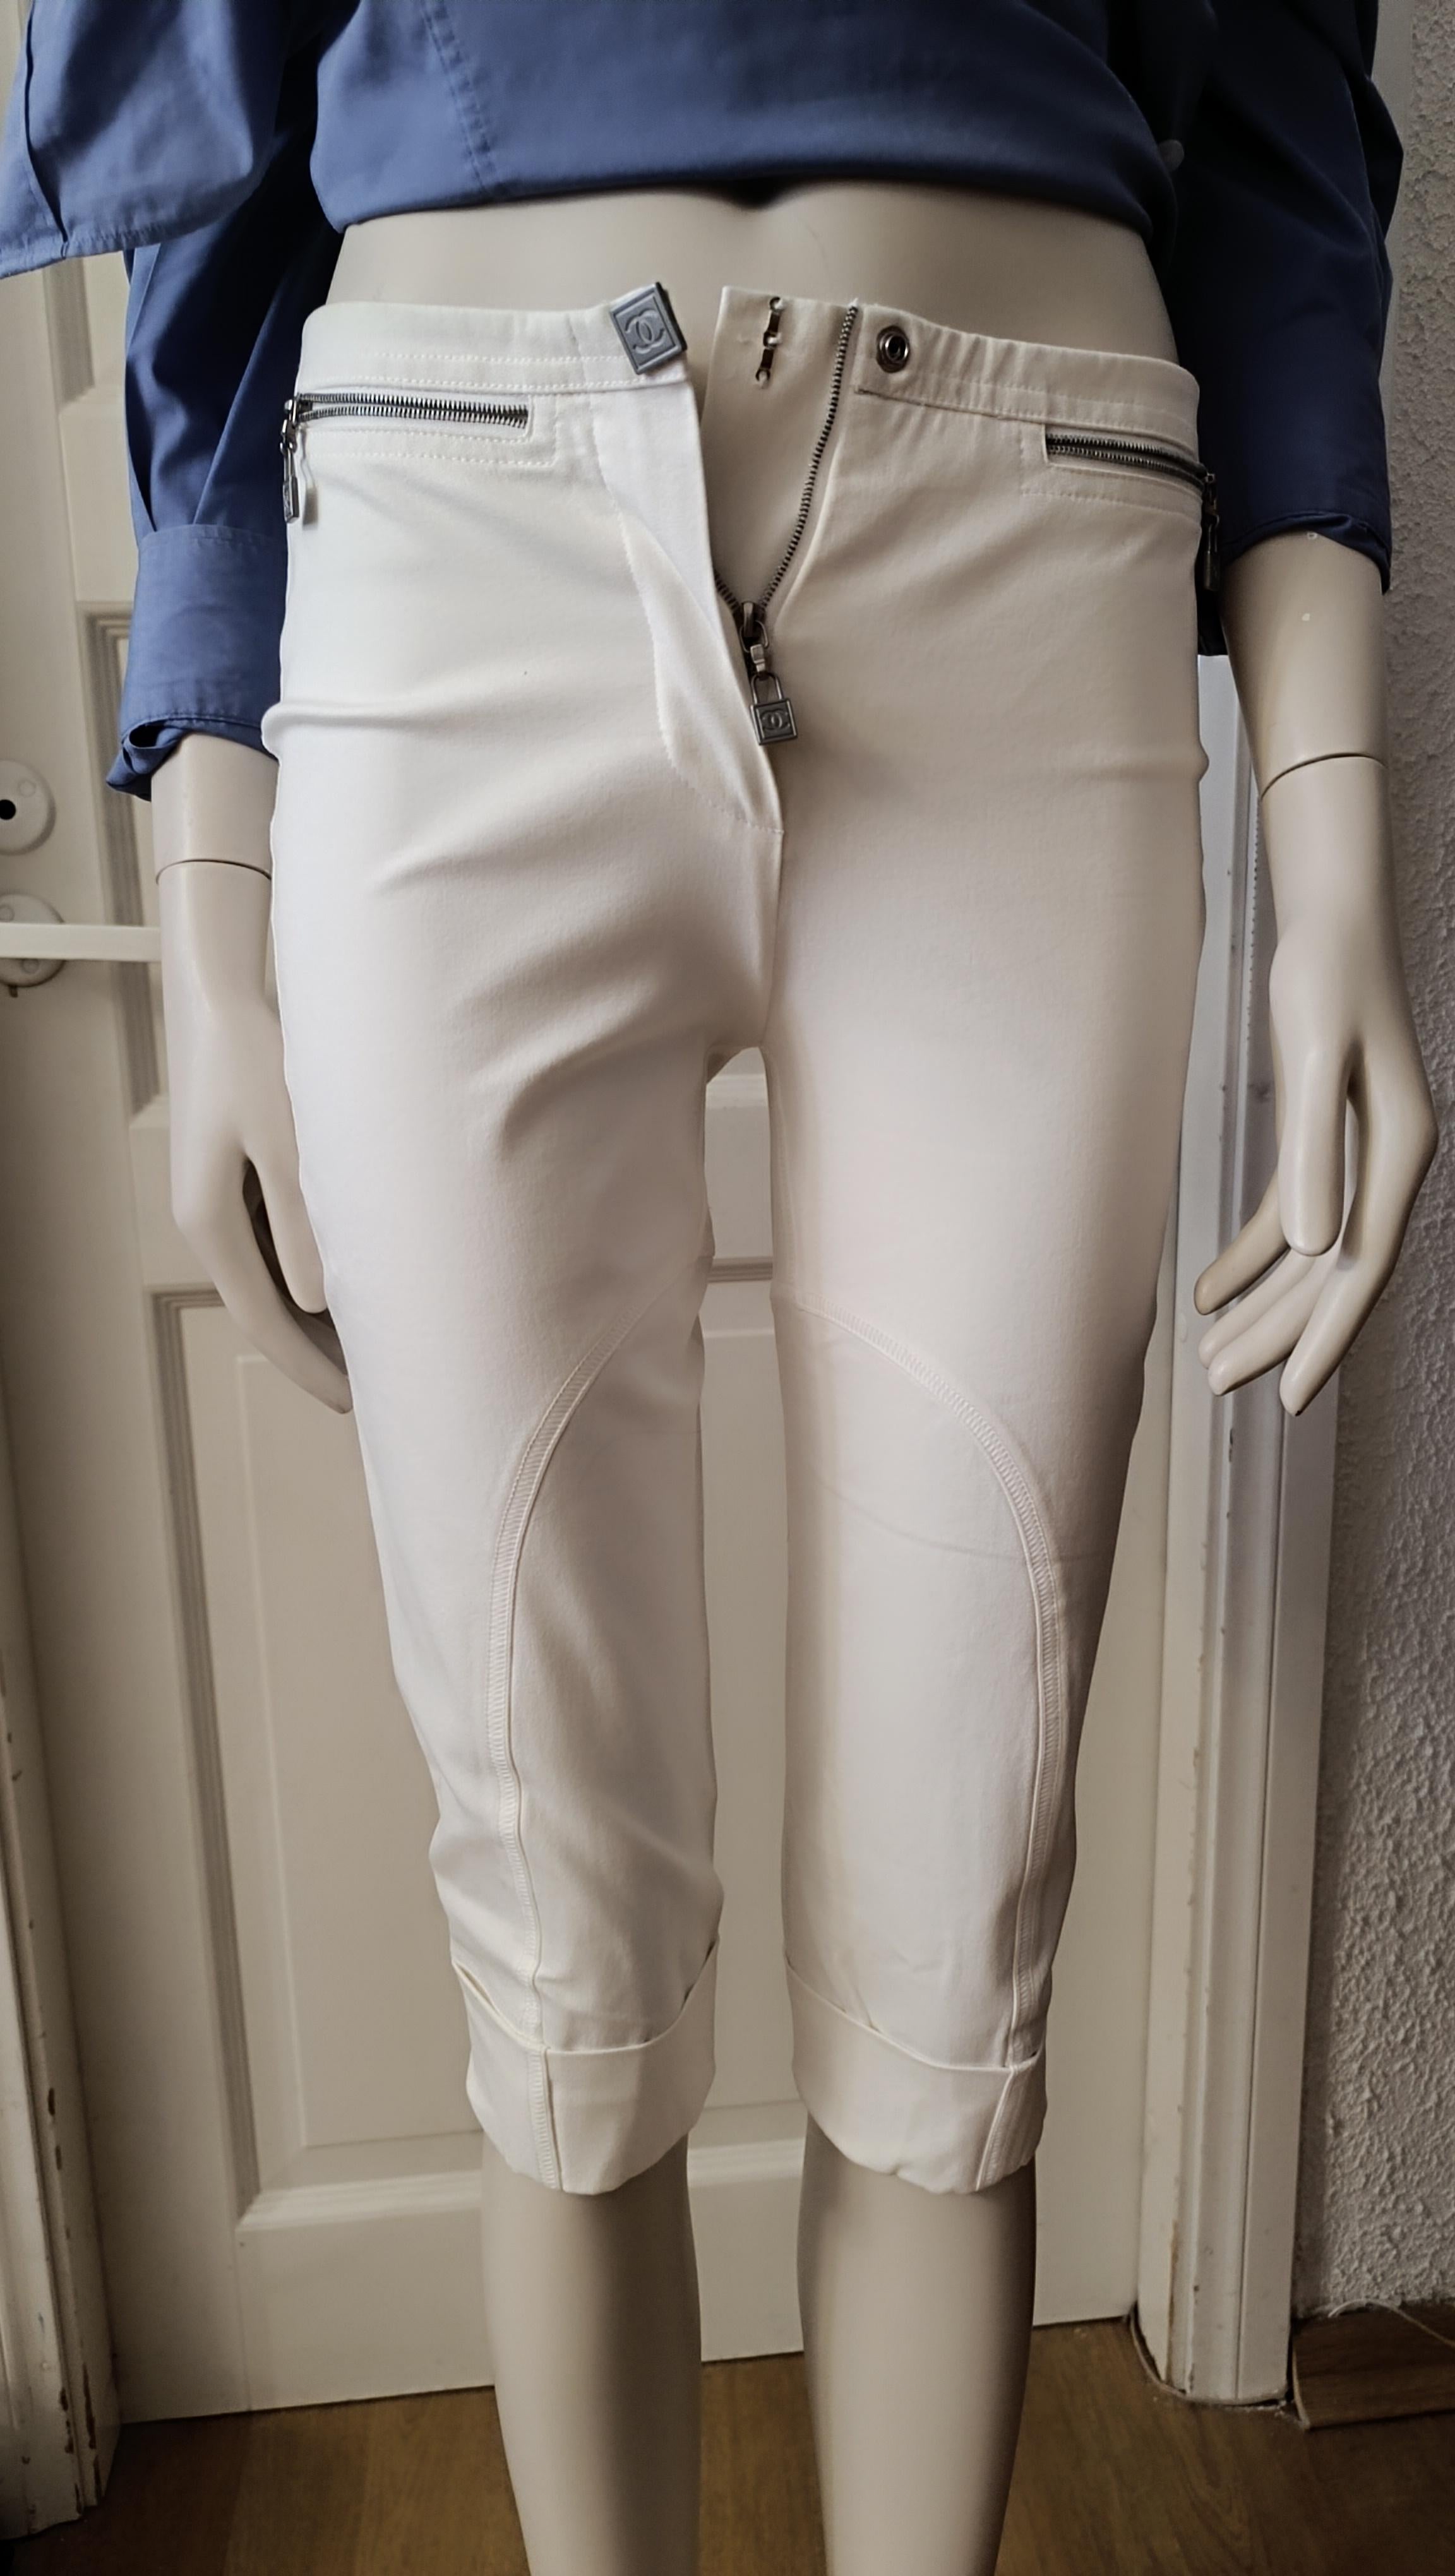 Chanel & Karl Lagerfeld 2009 white breeches / capri
Karl Lagerfeld for Channel
Collection: 2009 sports line
Country of production: France
Marked Size: 34 FR (please pay attention to the measurements!!!!)
Chanel style: 09P / AL779 / P25311V15763
The